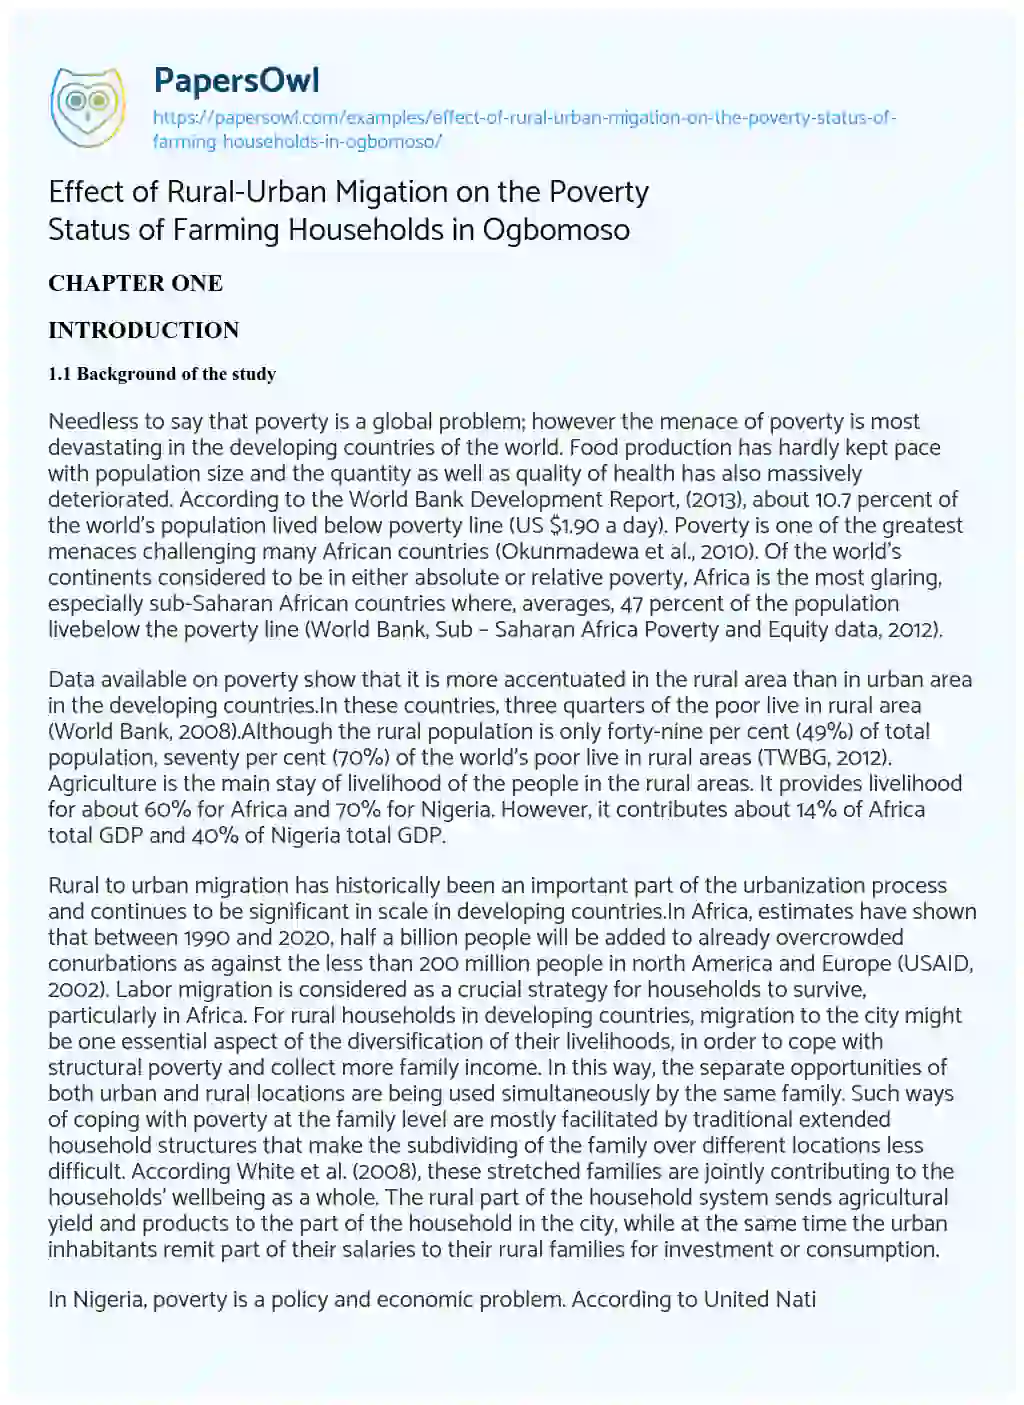 Essay on Effect of Rural-Urban Migation on the Poverty Status of Farming Households in Ogbomoso